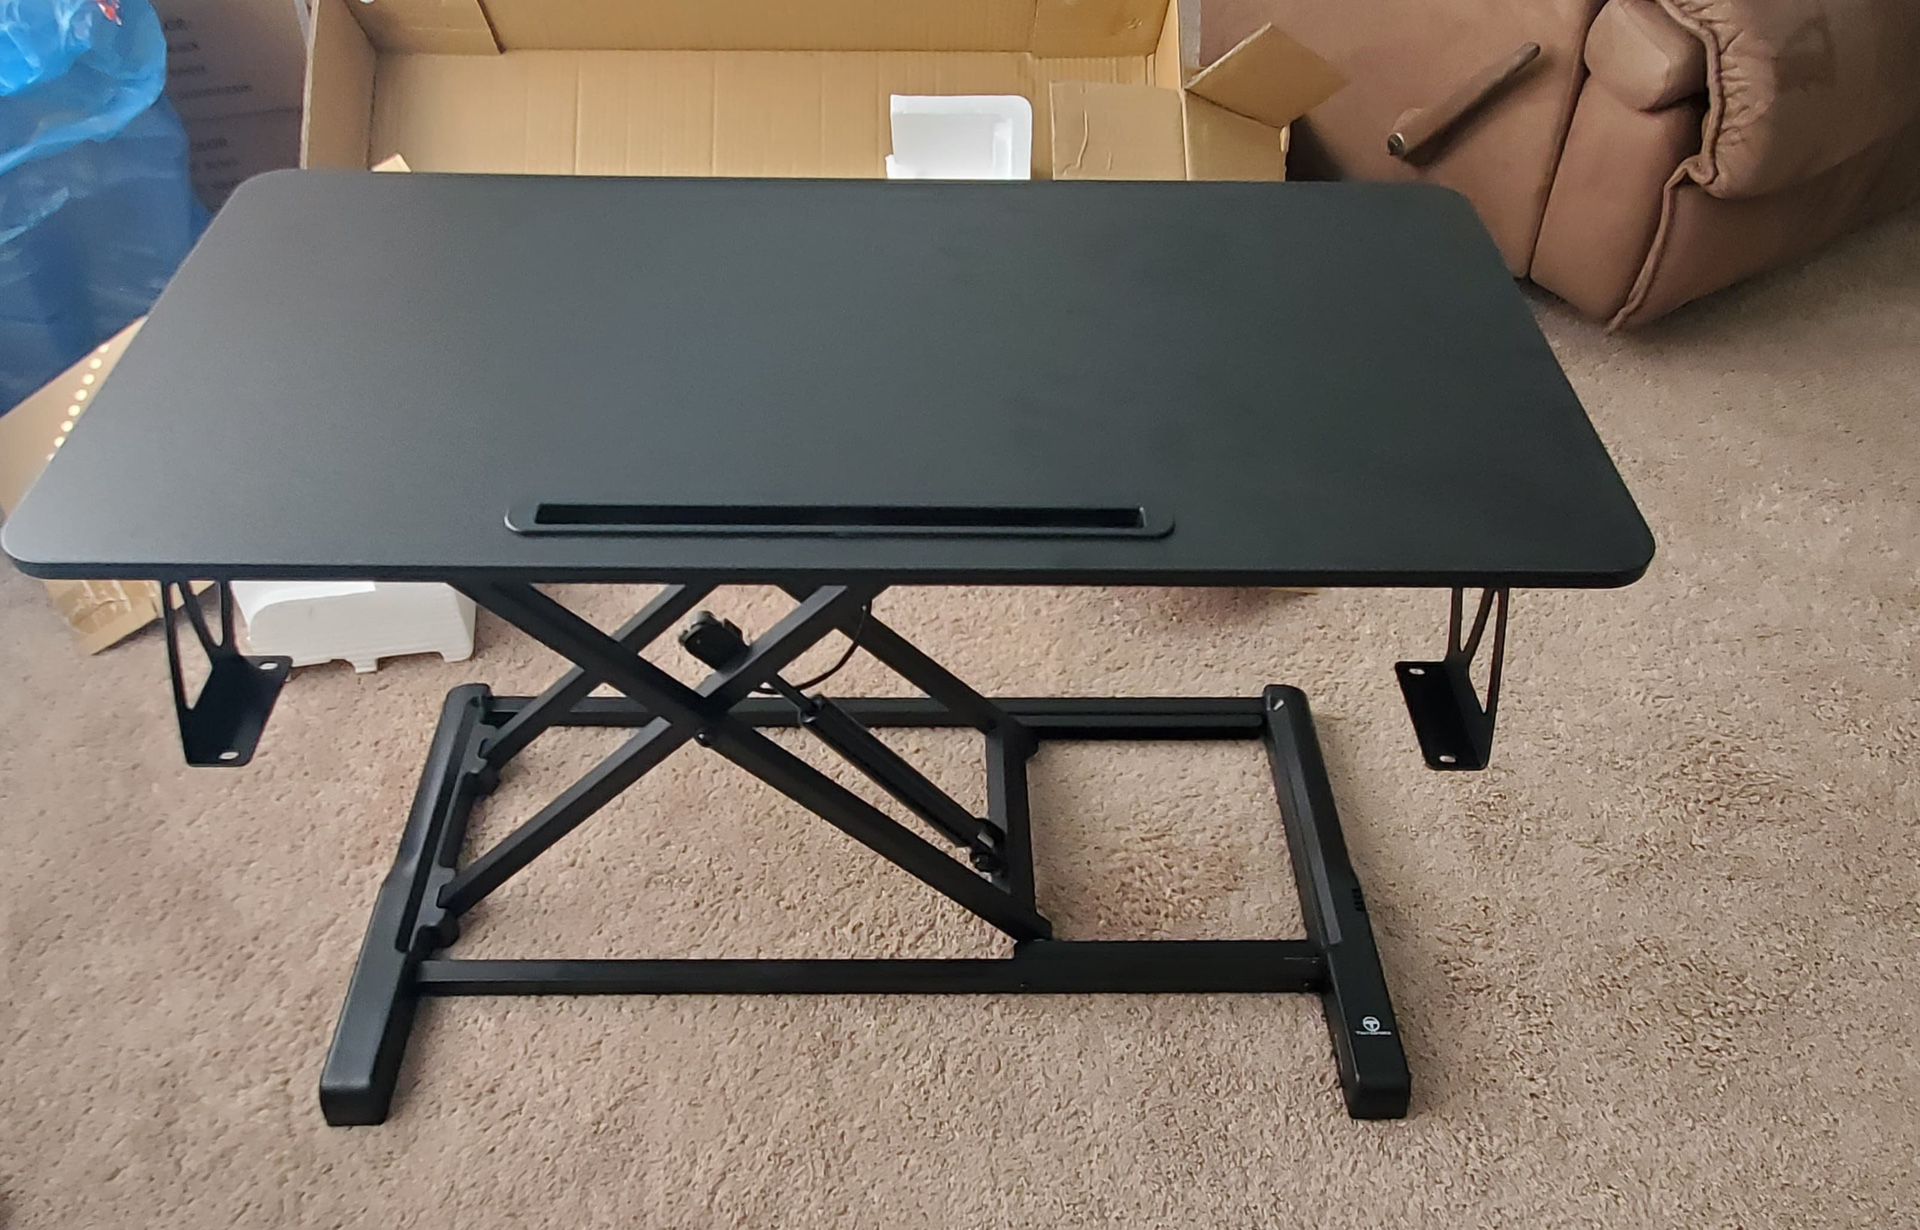 Brand new TechOrbits standing desk converter with gas spring lift for easy switching between sitting and standing. Height adjustable.